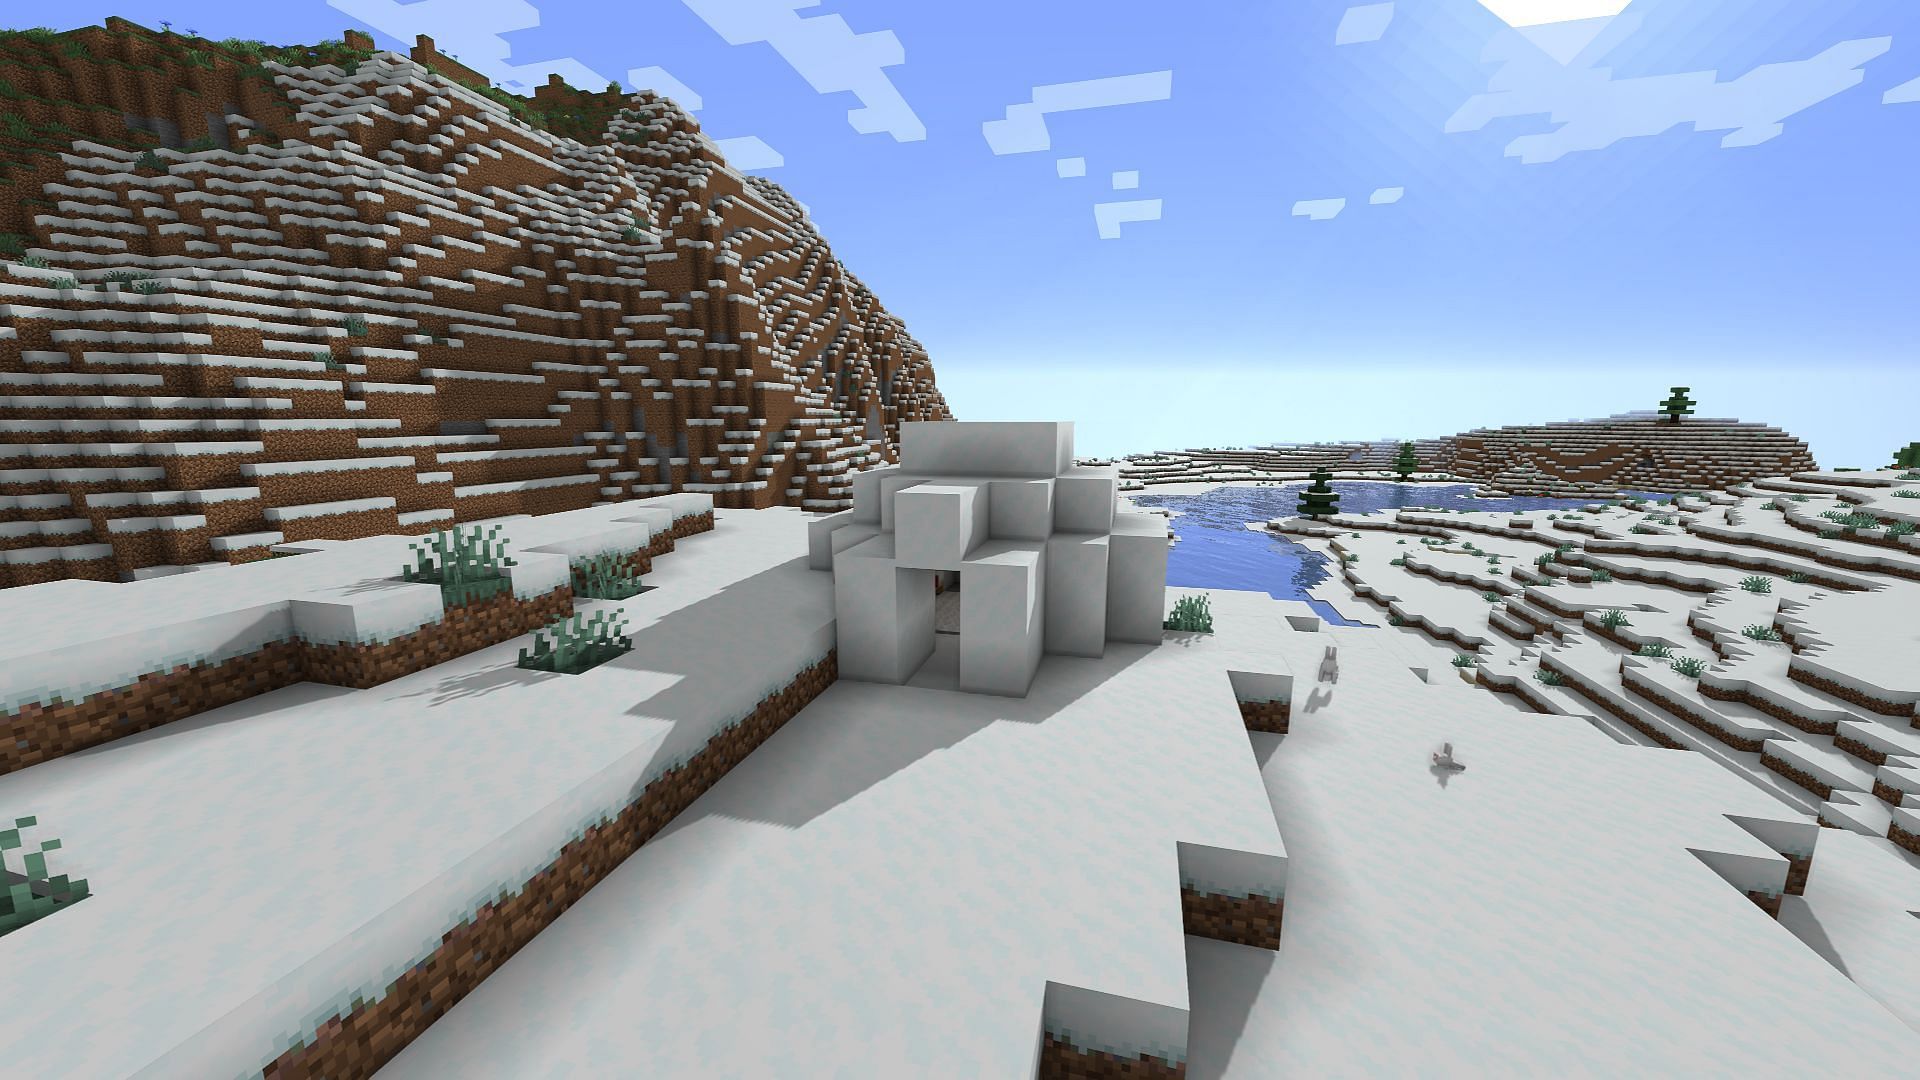 One of the basement igloos found in the seed (Image via Minecraft)